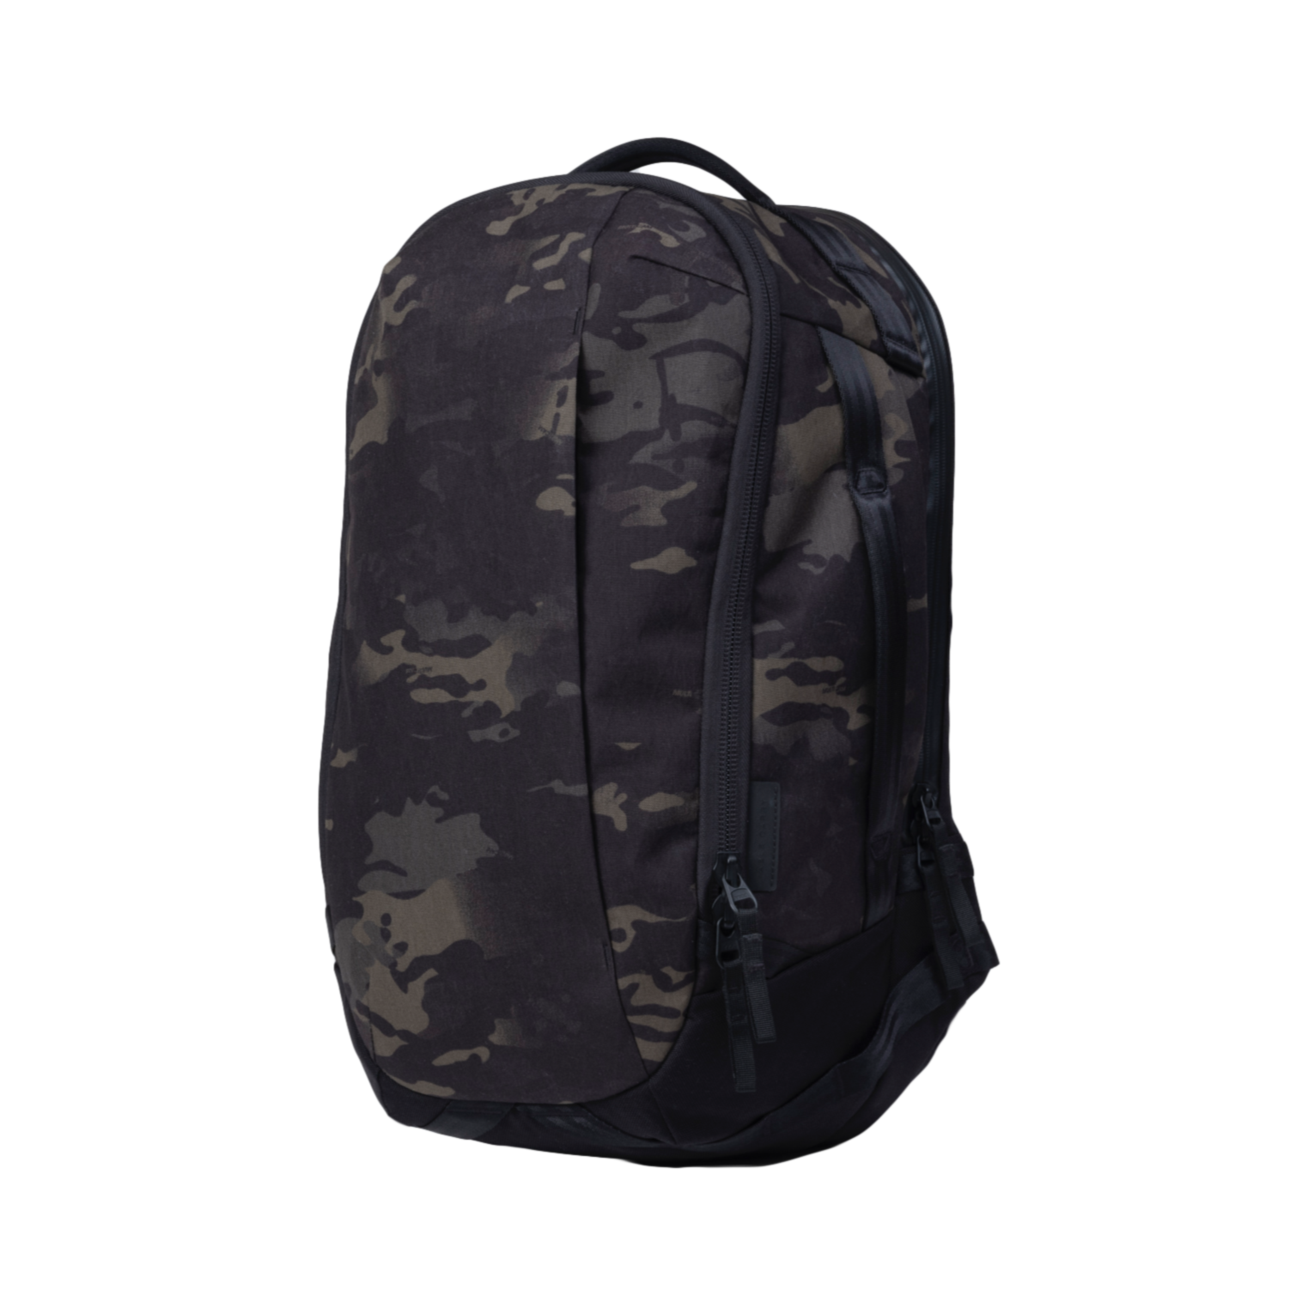 Able Carry Max Backpack - Storming Gravity